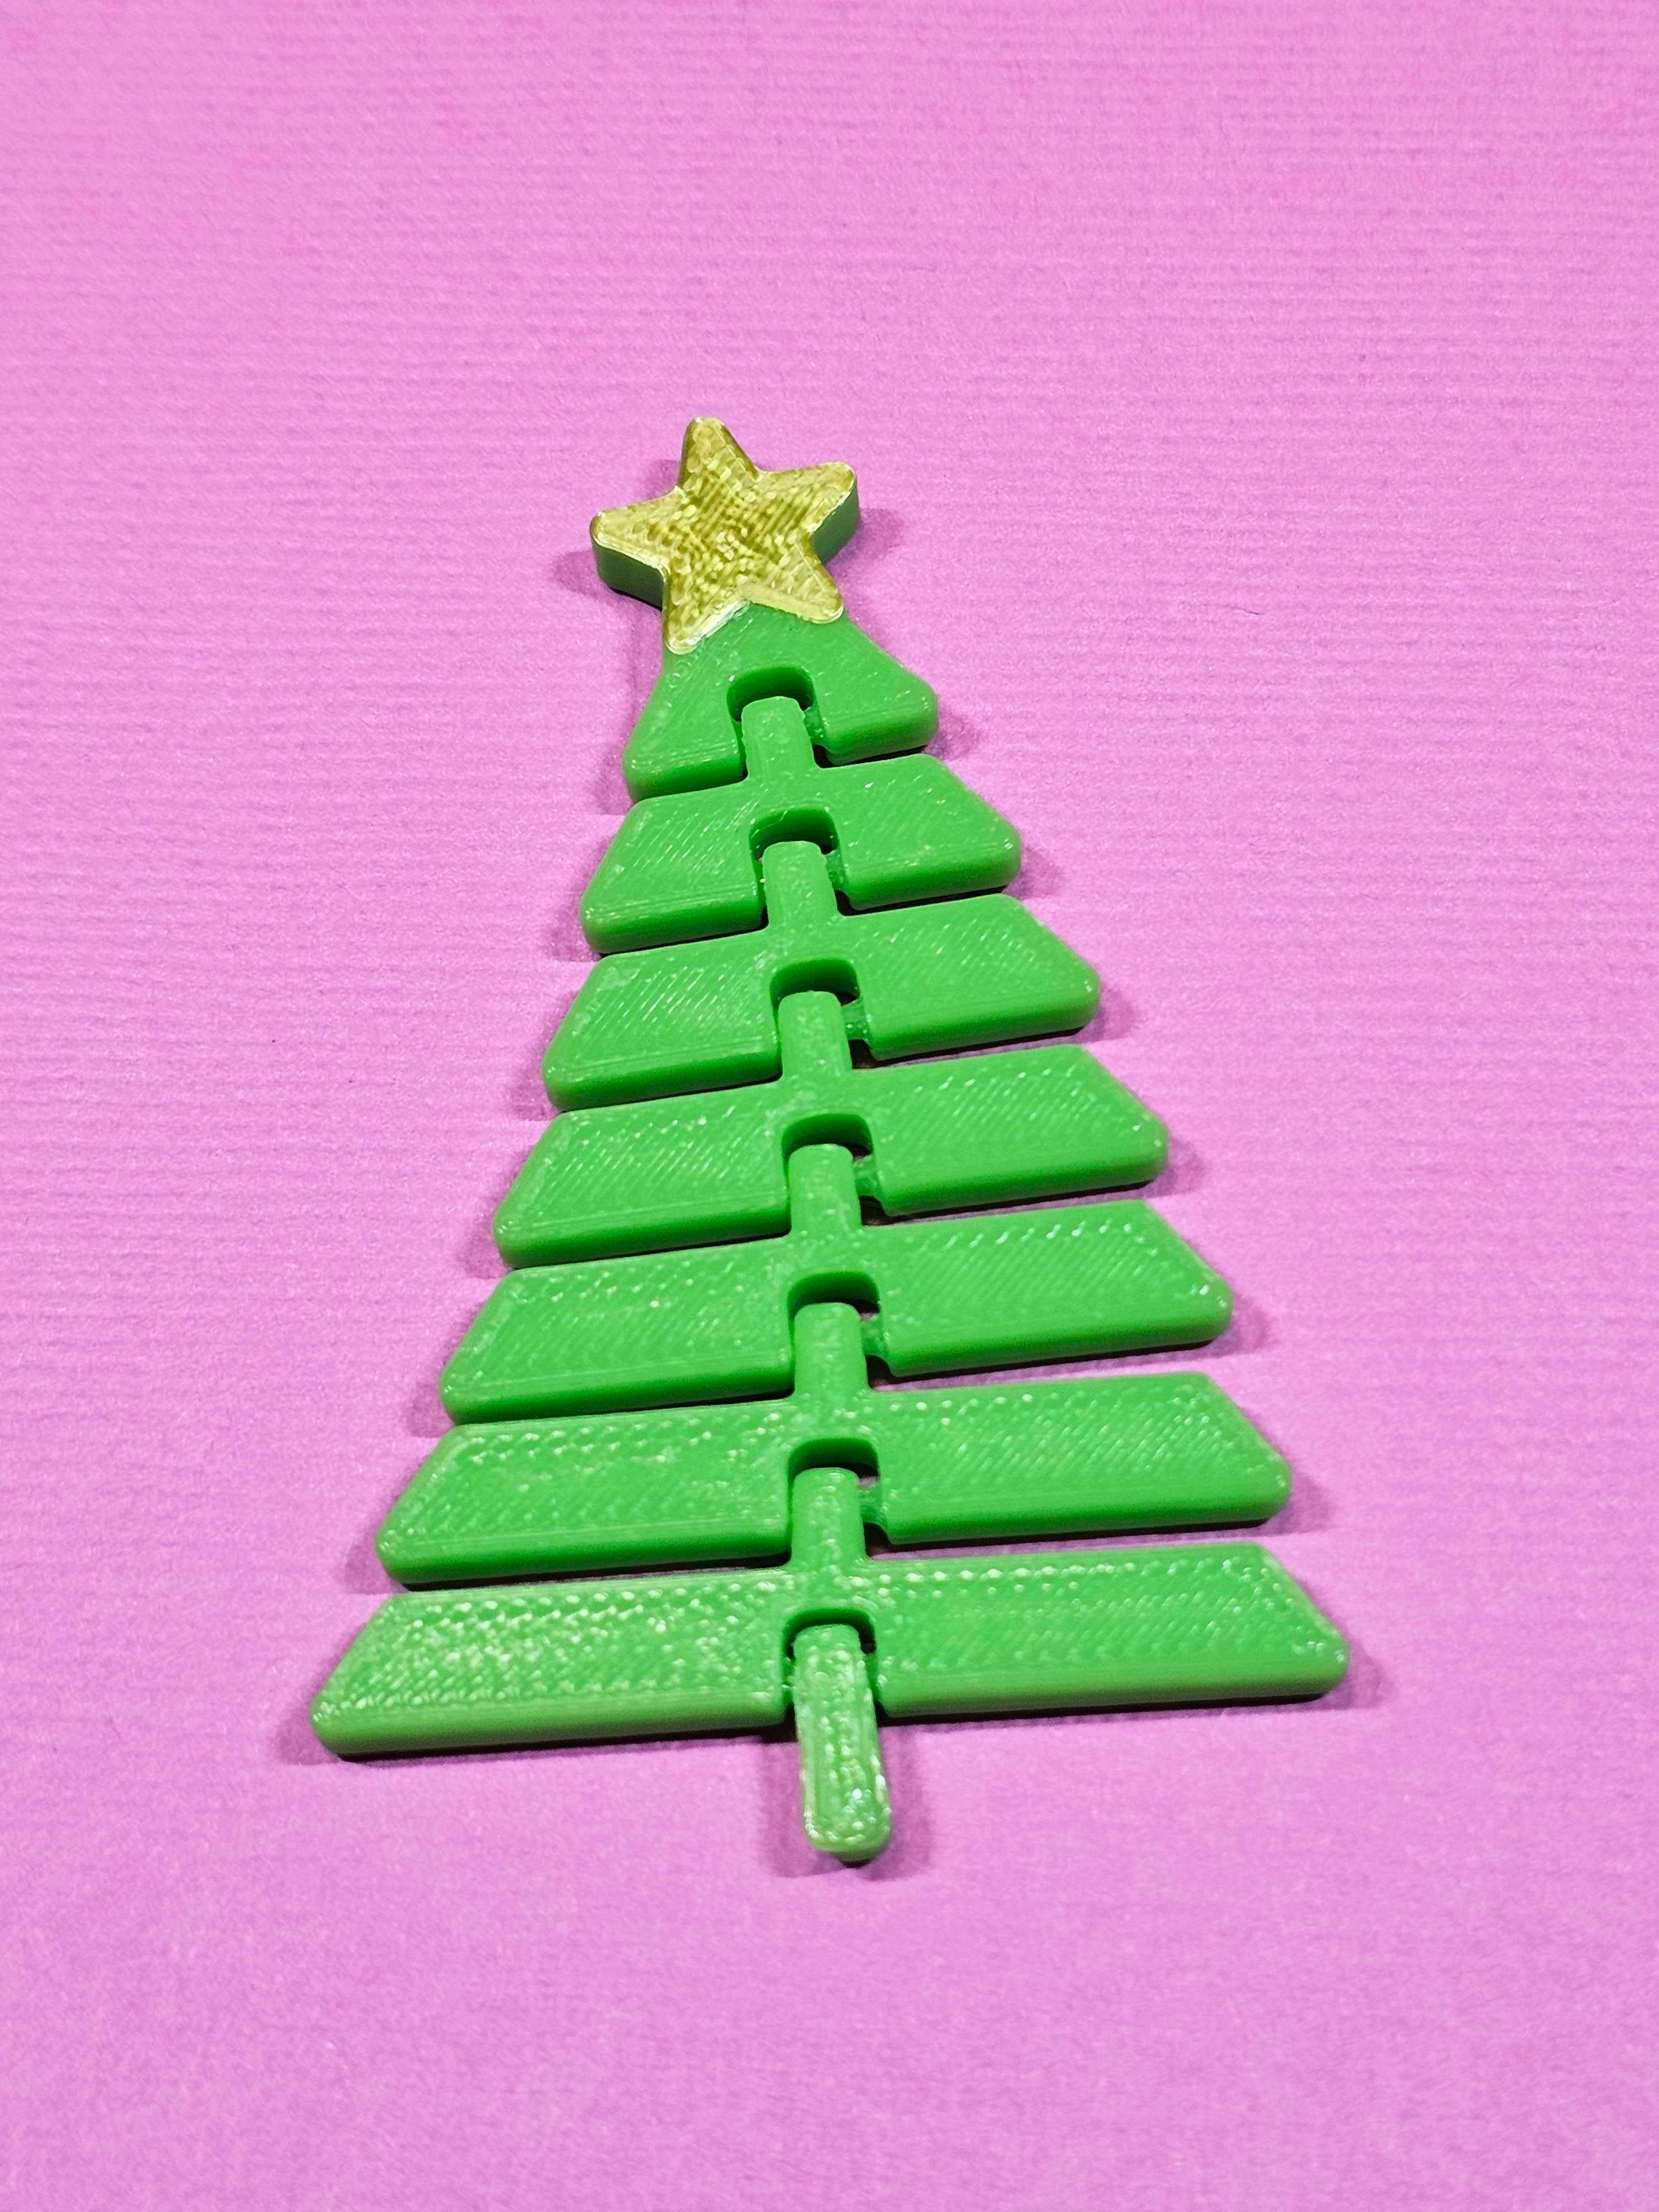 Articulated Christmas Tree with Star - Print in place fidget toy - 3mf 3d model